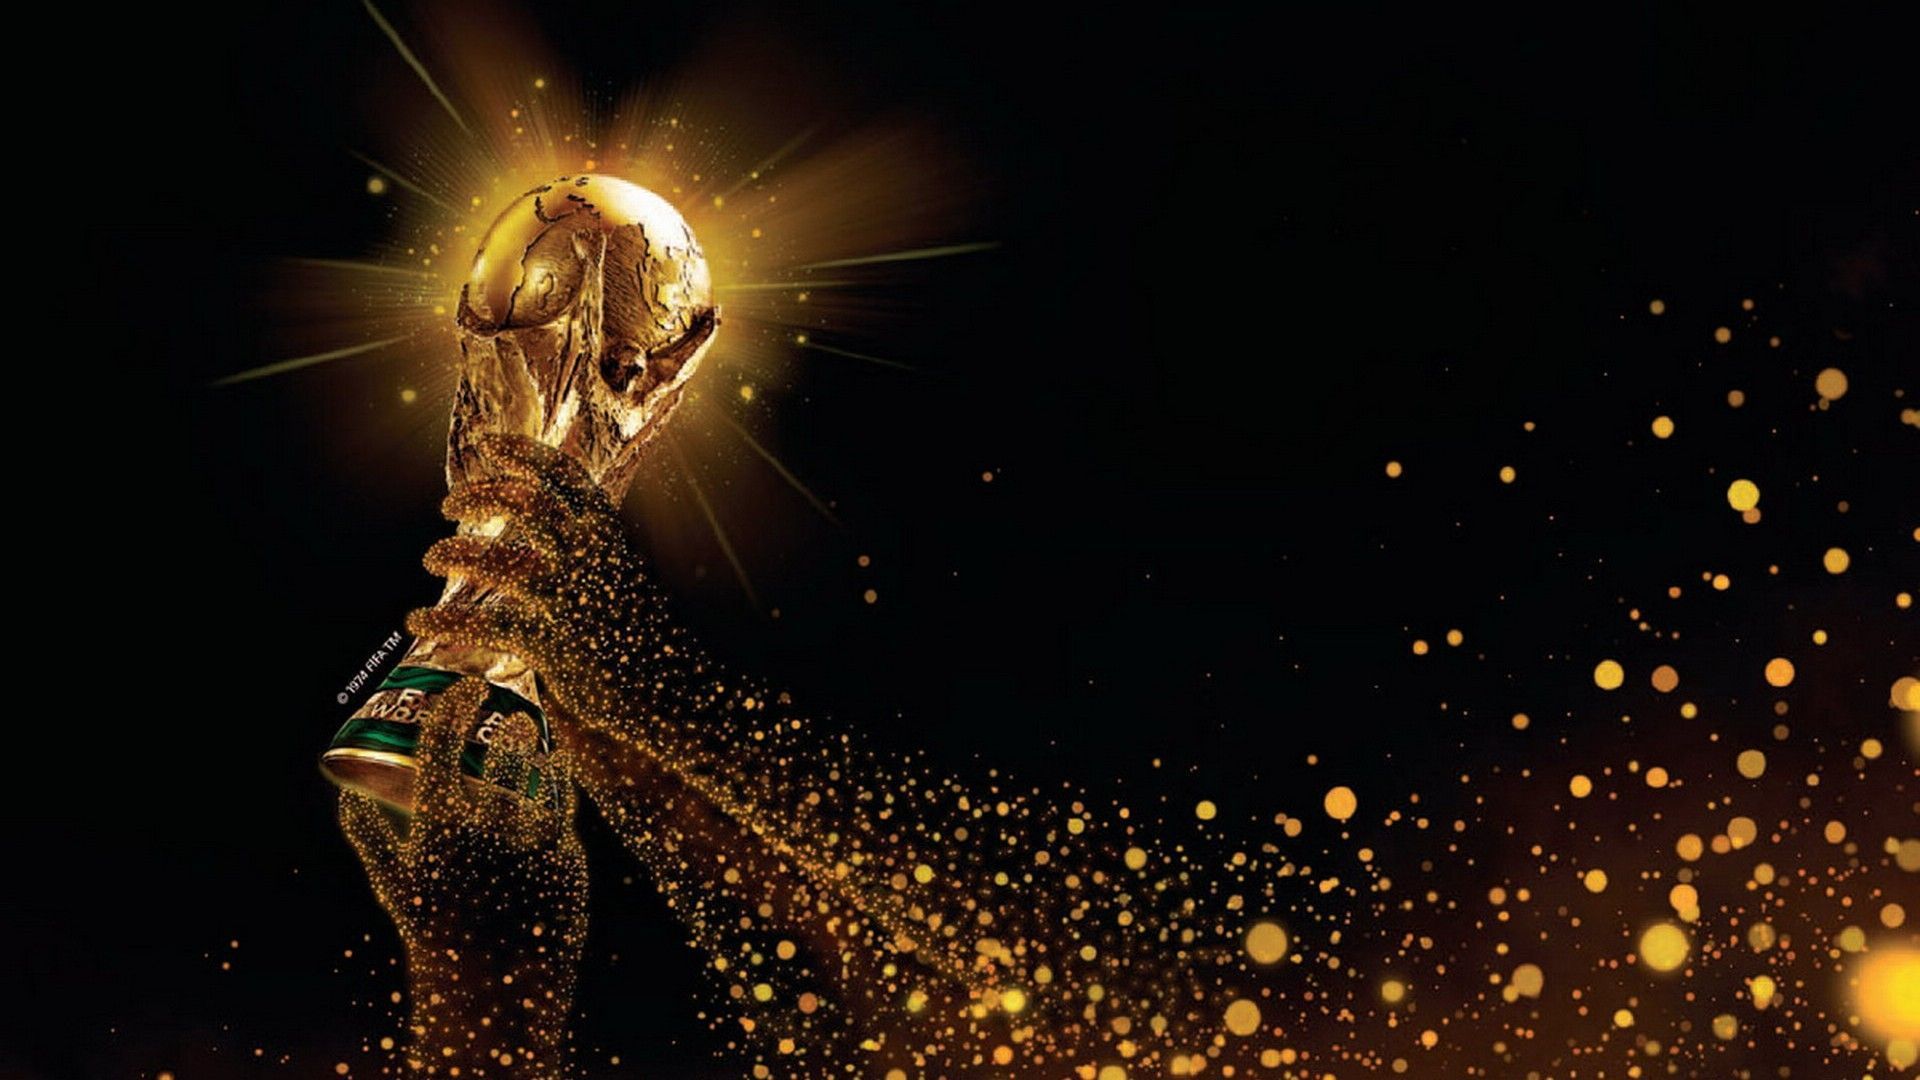 Gallery for - fifa world cup trophy wallpaper